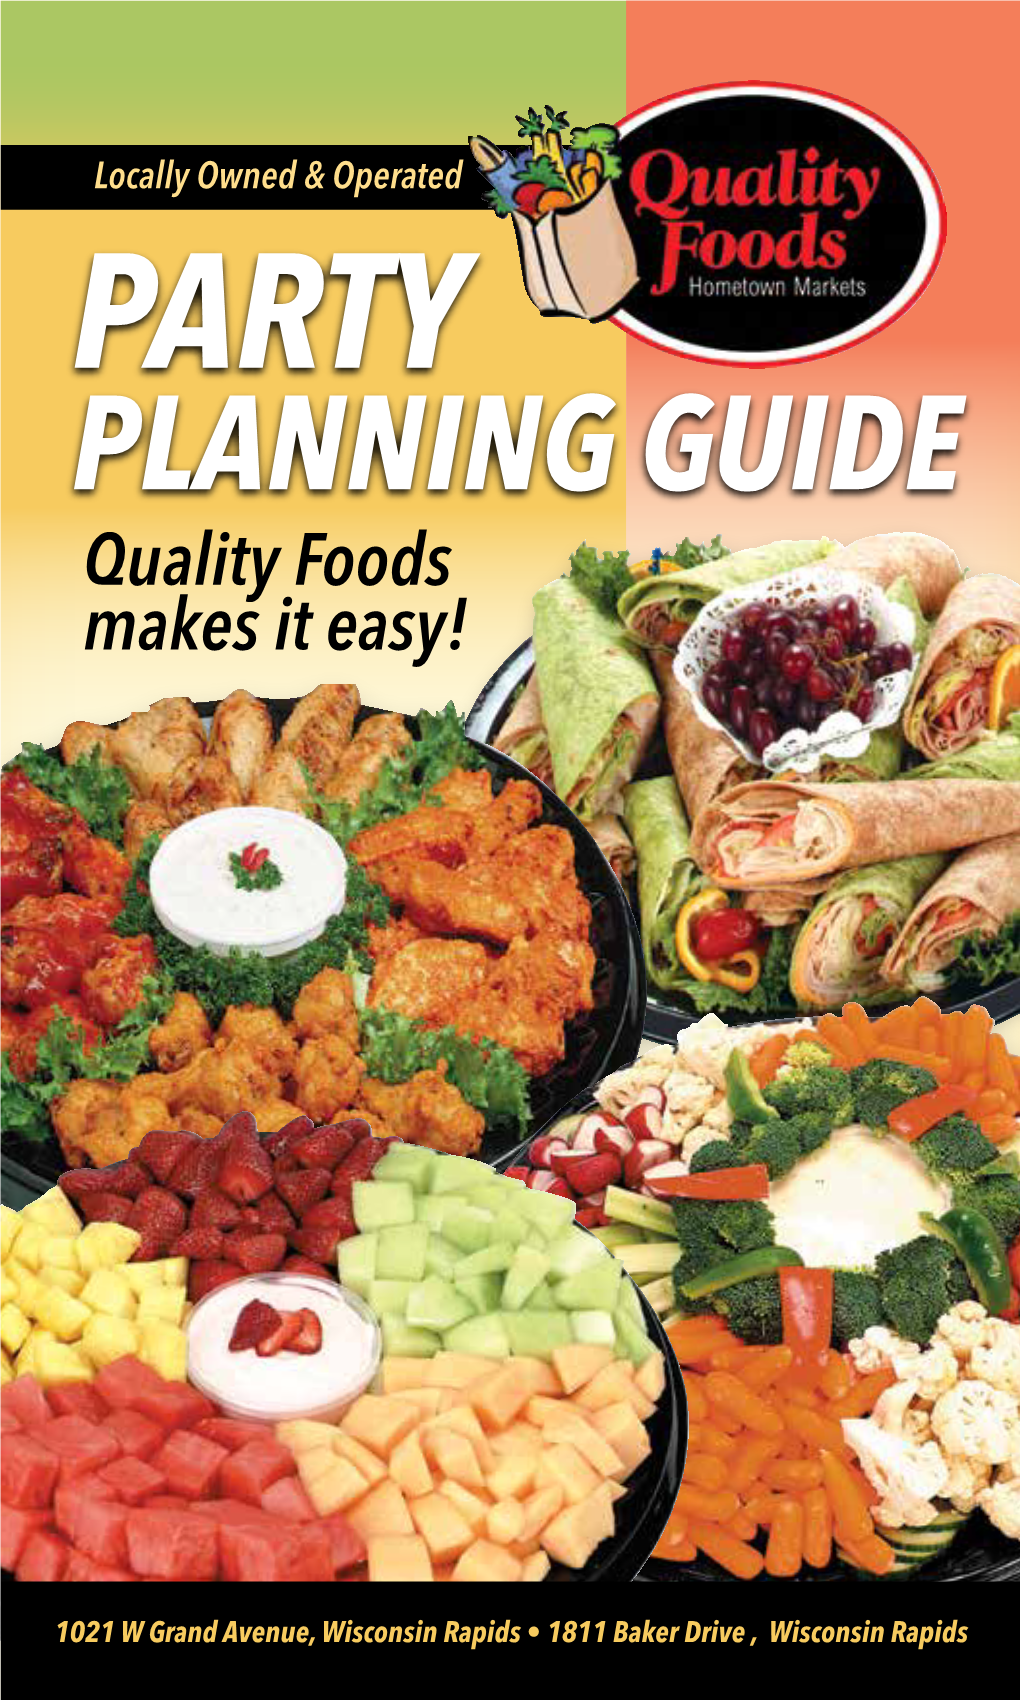 PARTY PLANNING GUIDE Quality Foods Makes It Easy!